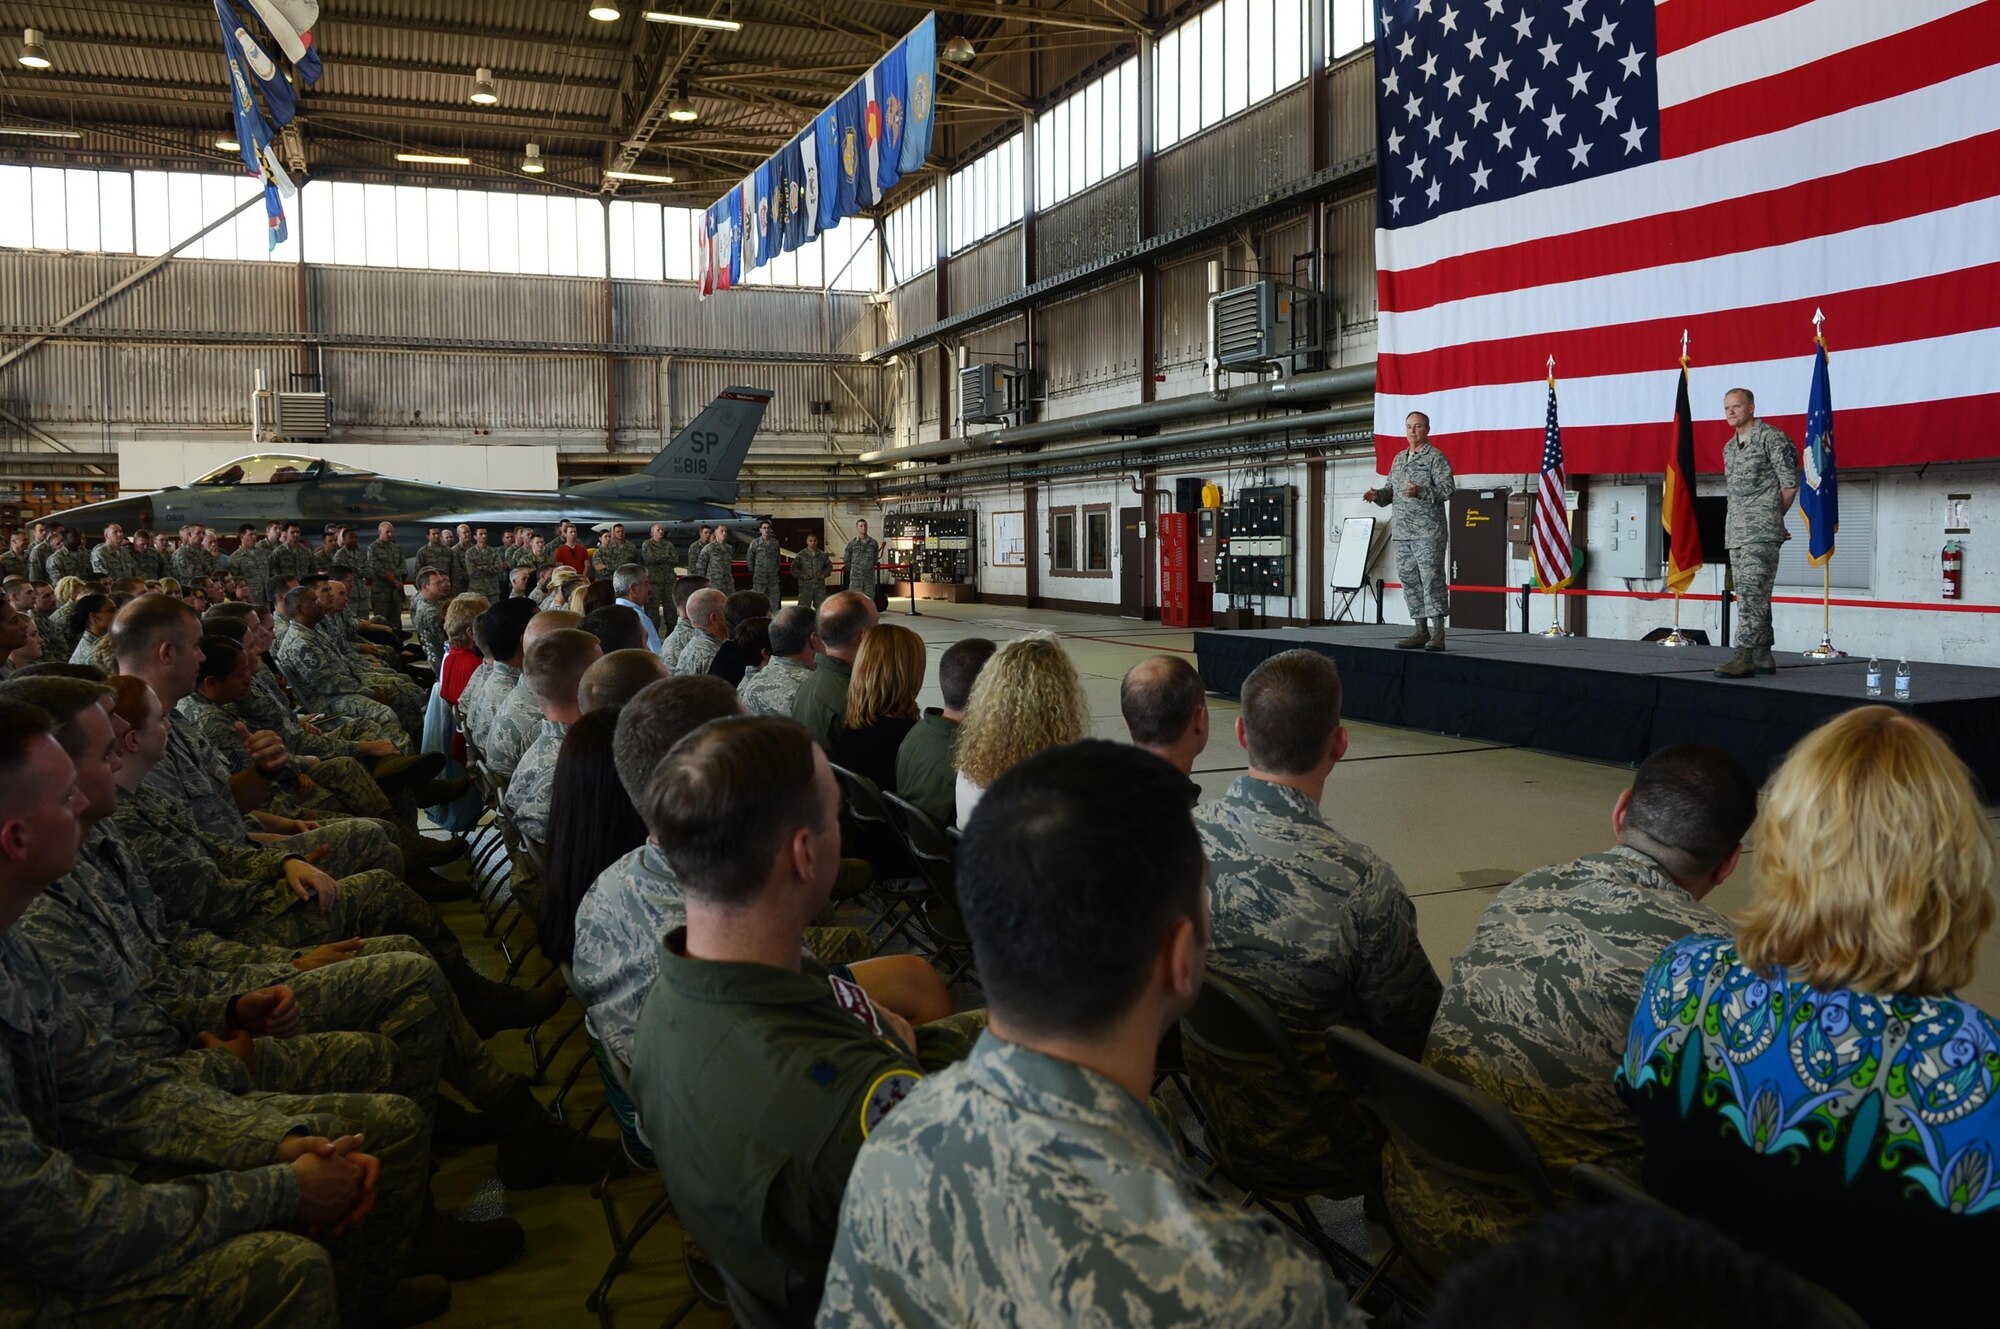 Air Force Chief of Staff Gen. Mark A. Welsh III and Chief Master Sgt. of the Air Force James Cody stand center stage in Hangar 1, addressing Airmen about Air Force issues during an Airman’s call Aug. 1, 2013. The senior leaders visited the base to thank Airmen and their families for their service and dedication, as well as address current challenges facing the Air Force. 